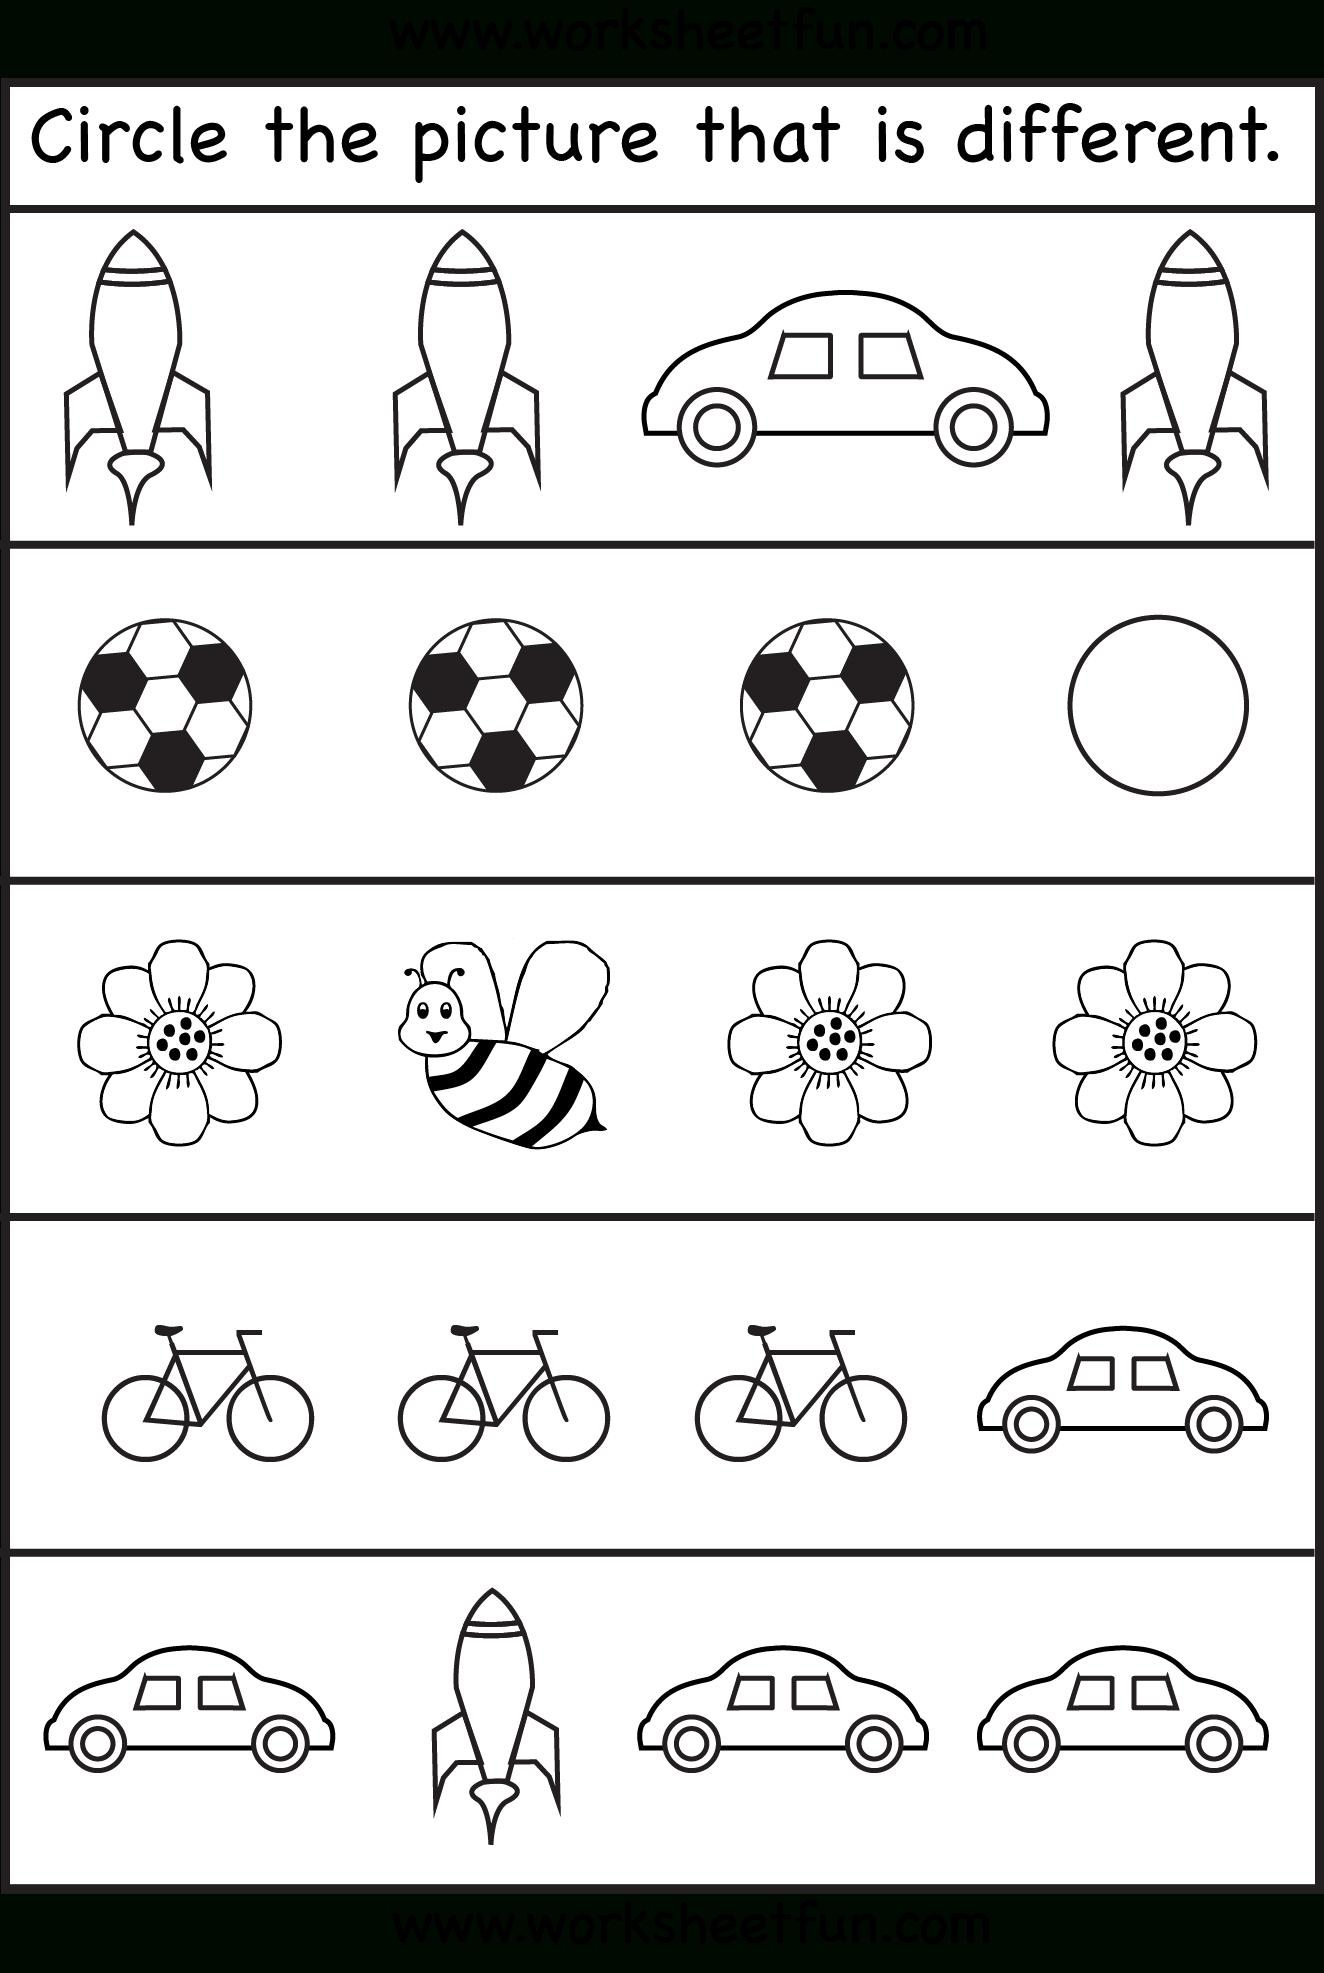 Same Or Different Worksheets For Toddler | Kids Worksheets Printable | Kindergarten Worksheets Printable Activities